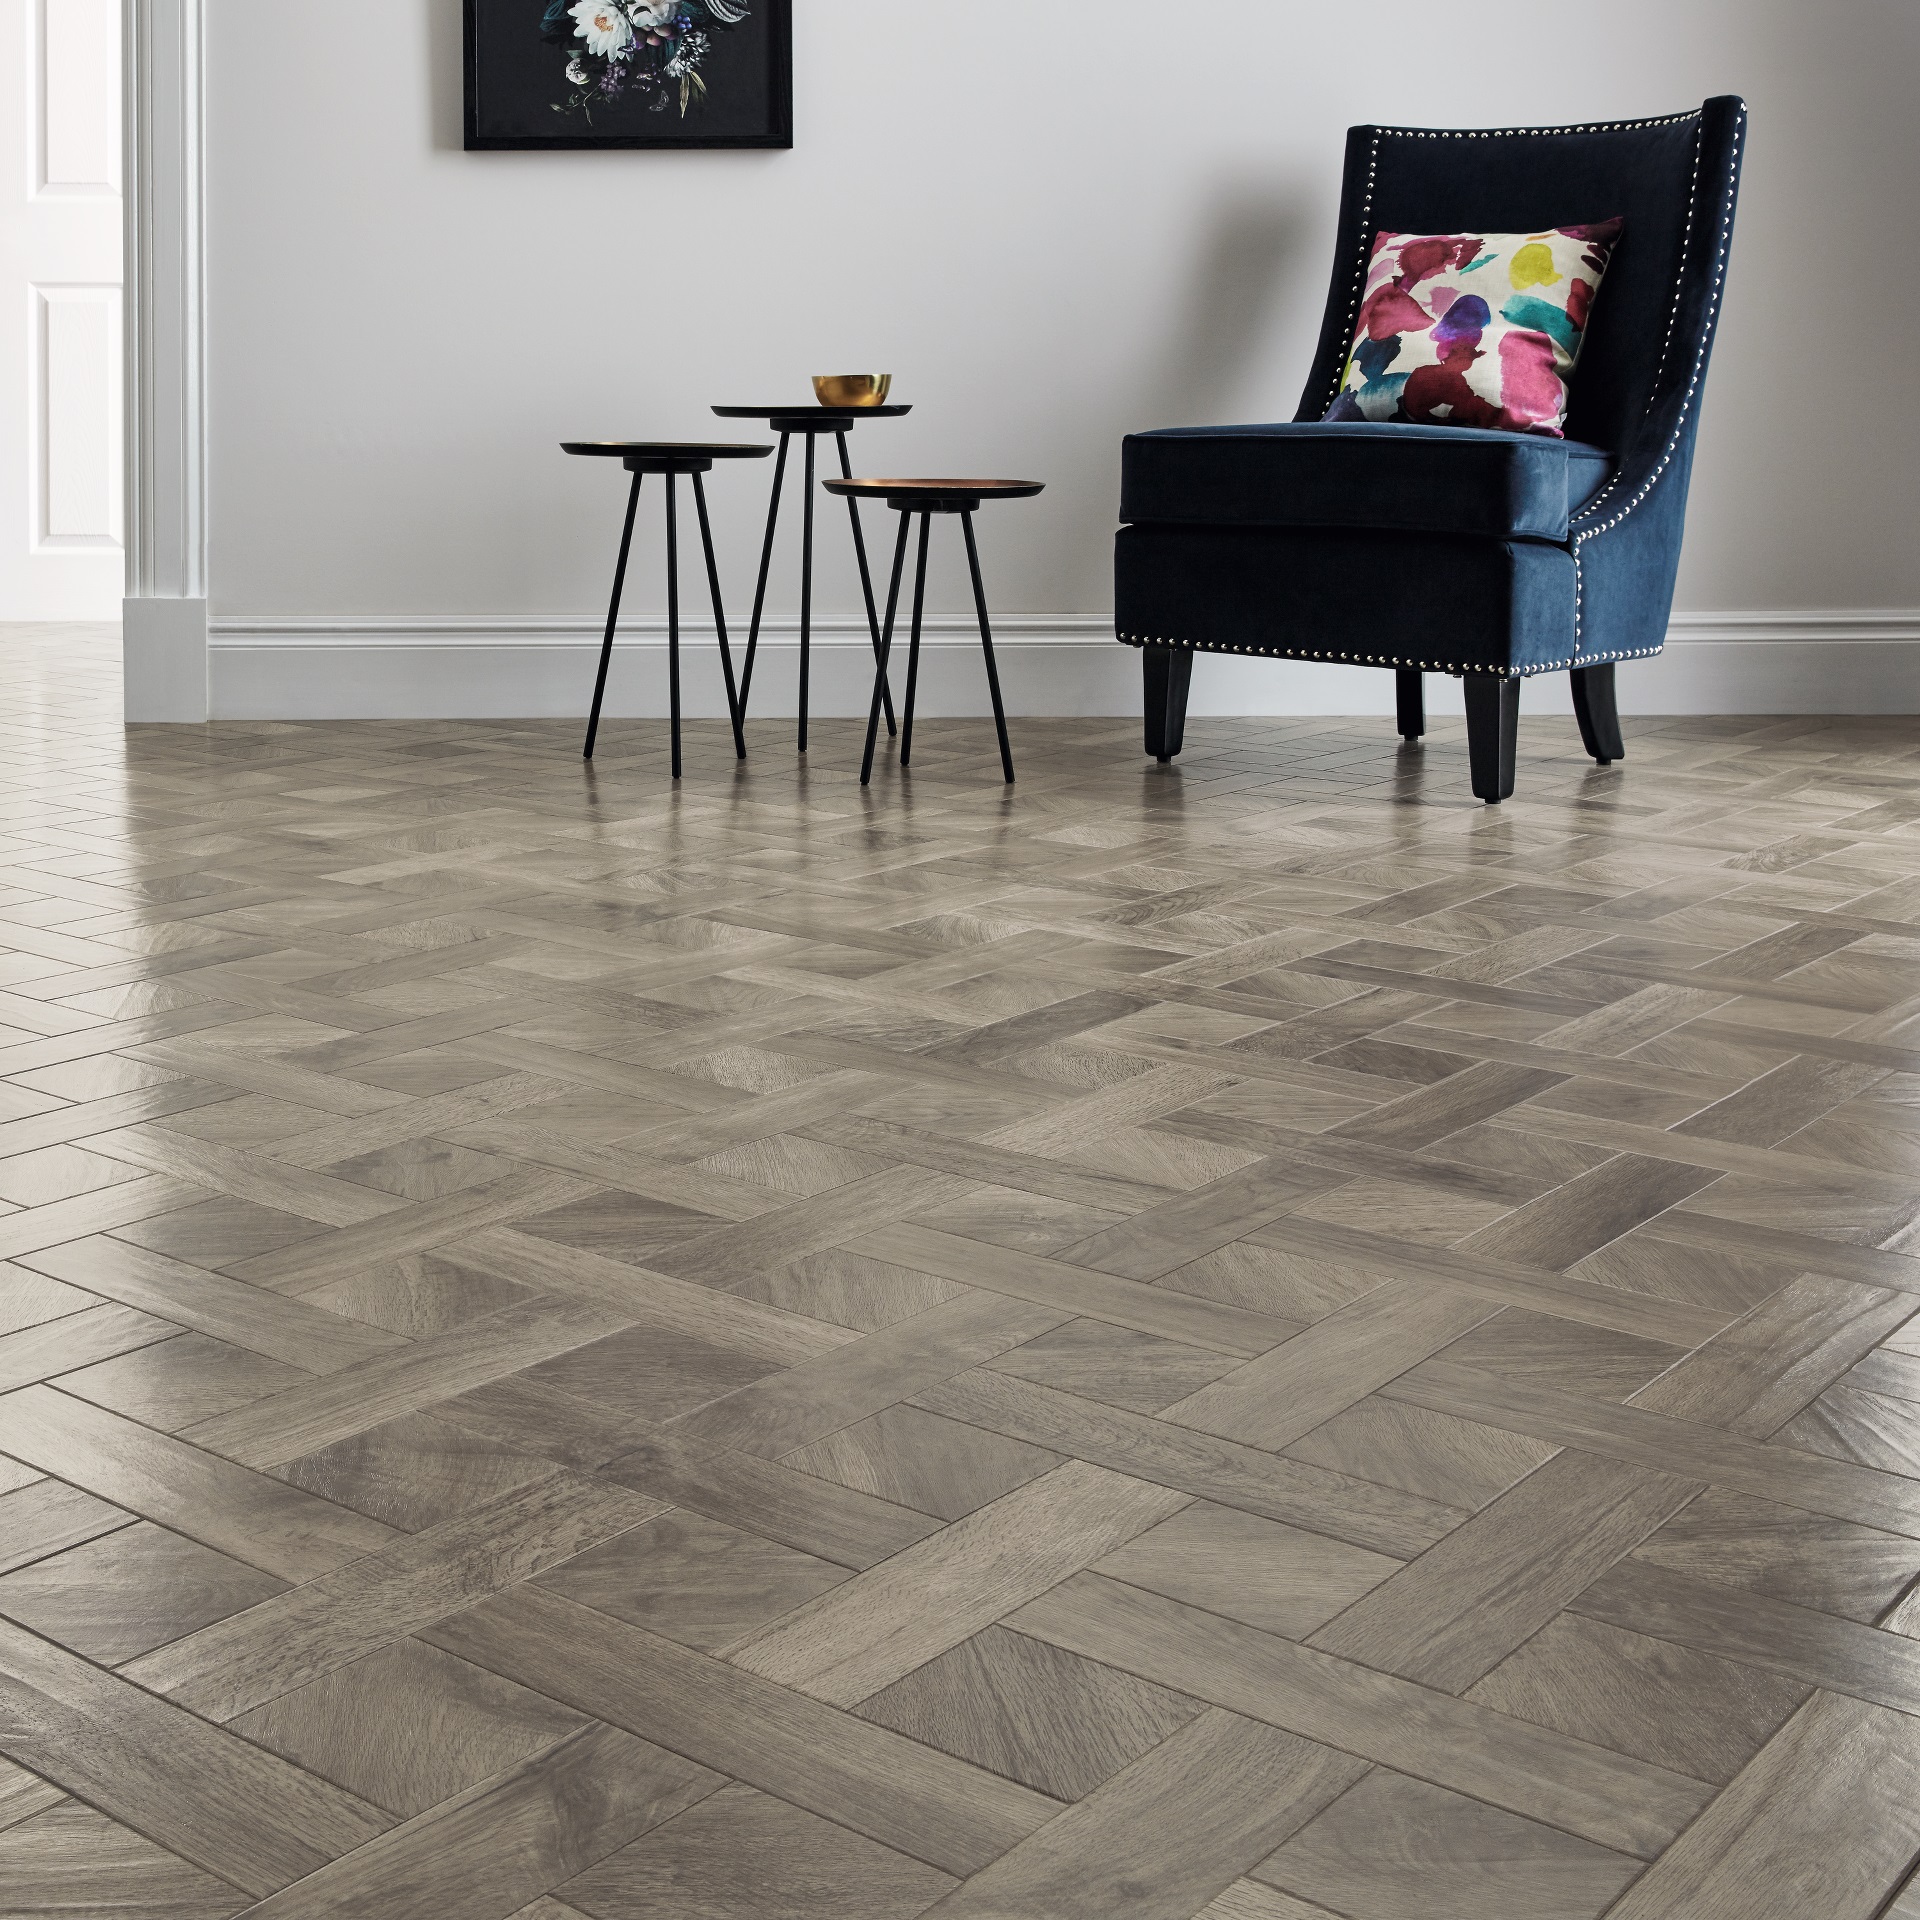 Beautify your house with perfect flooring